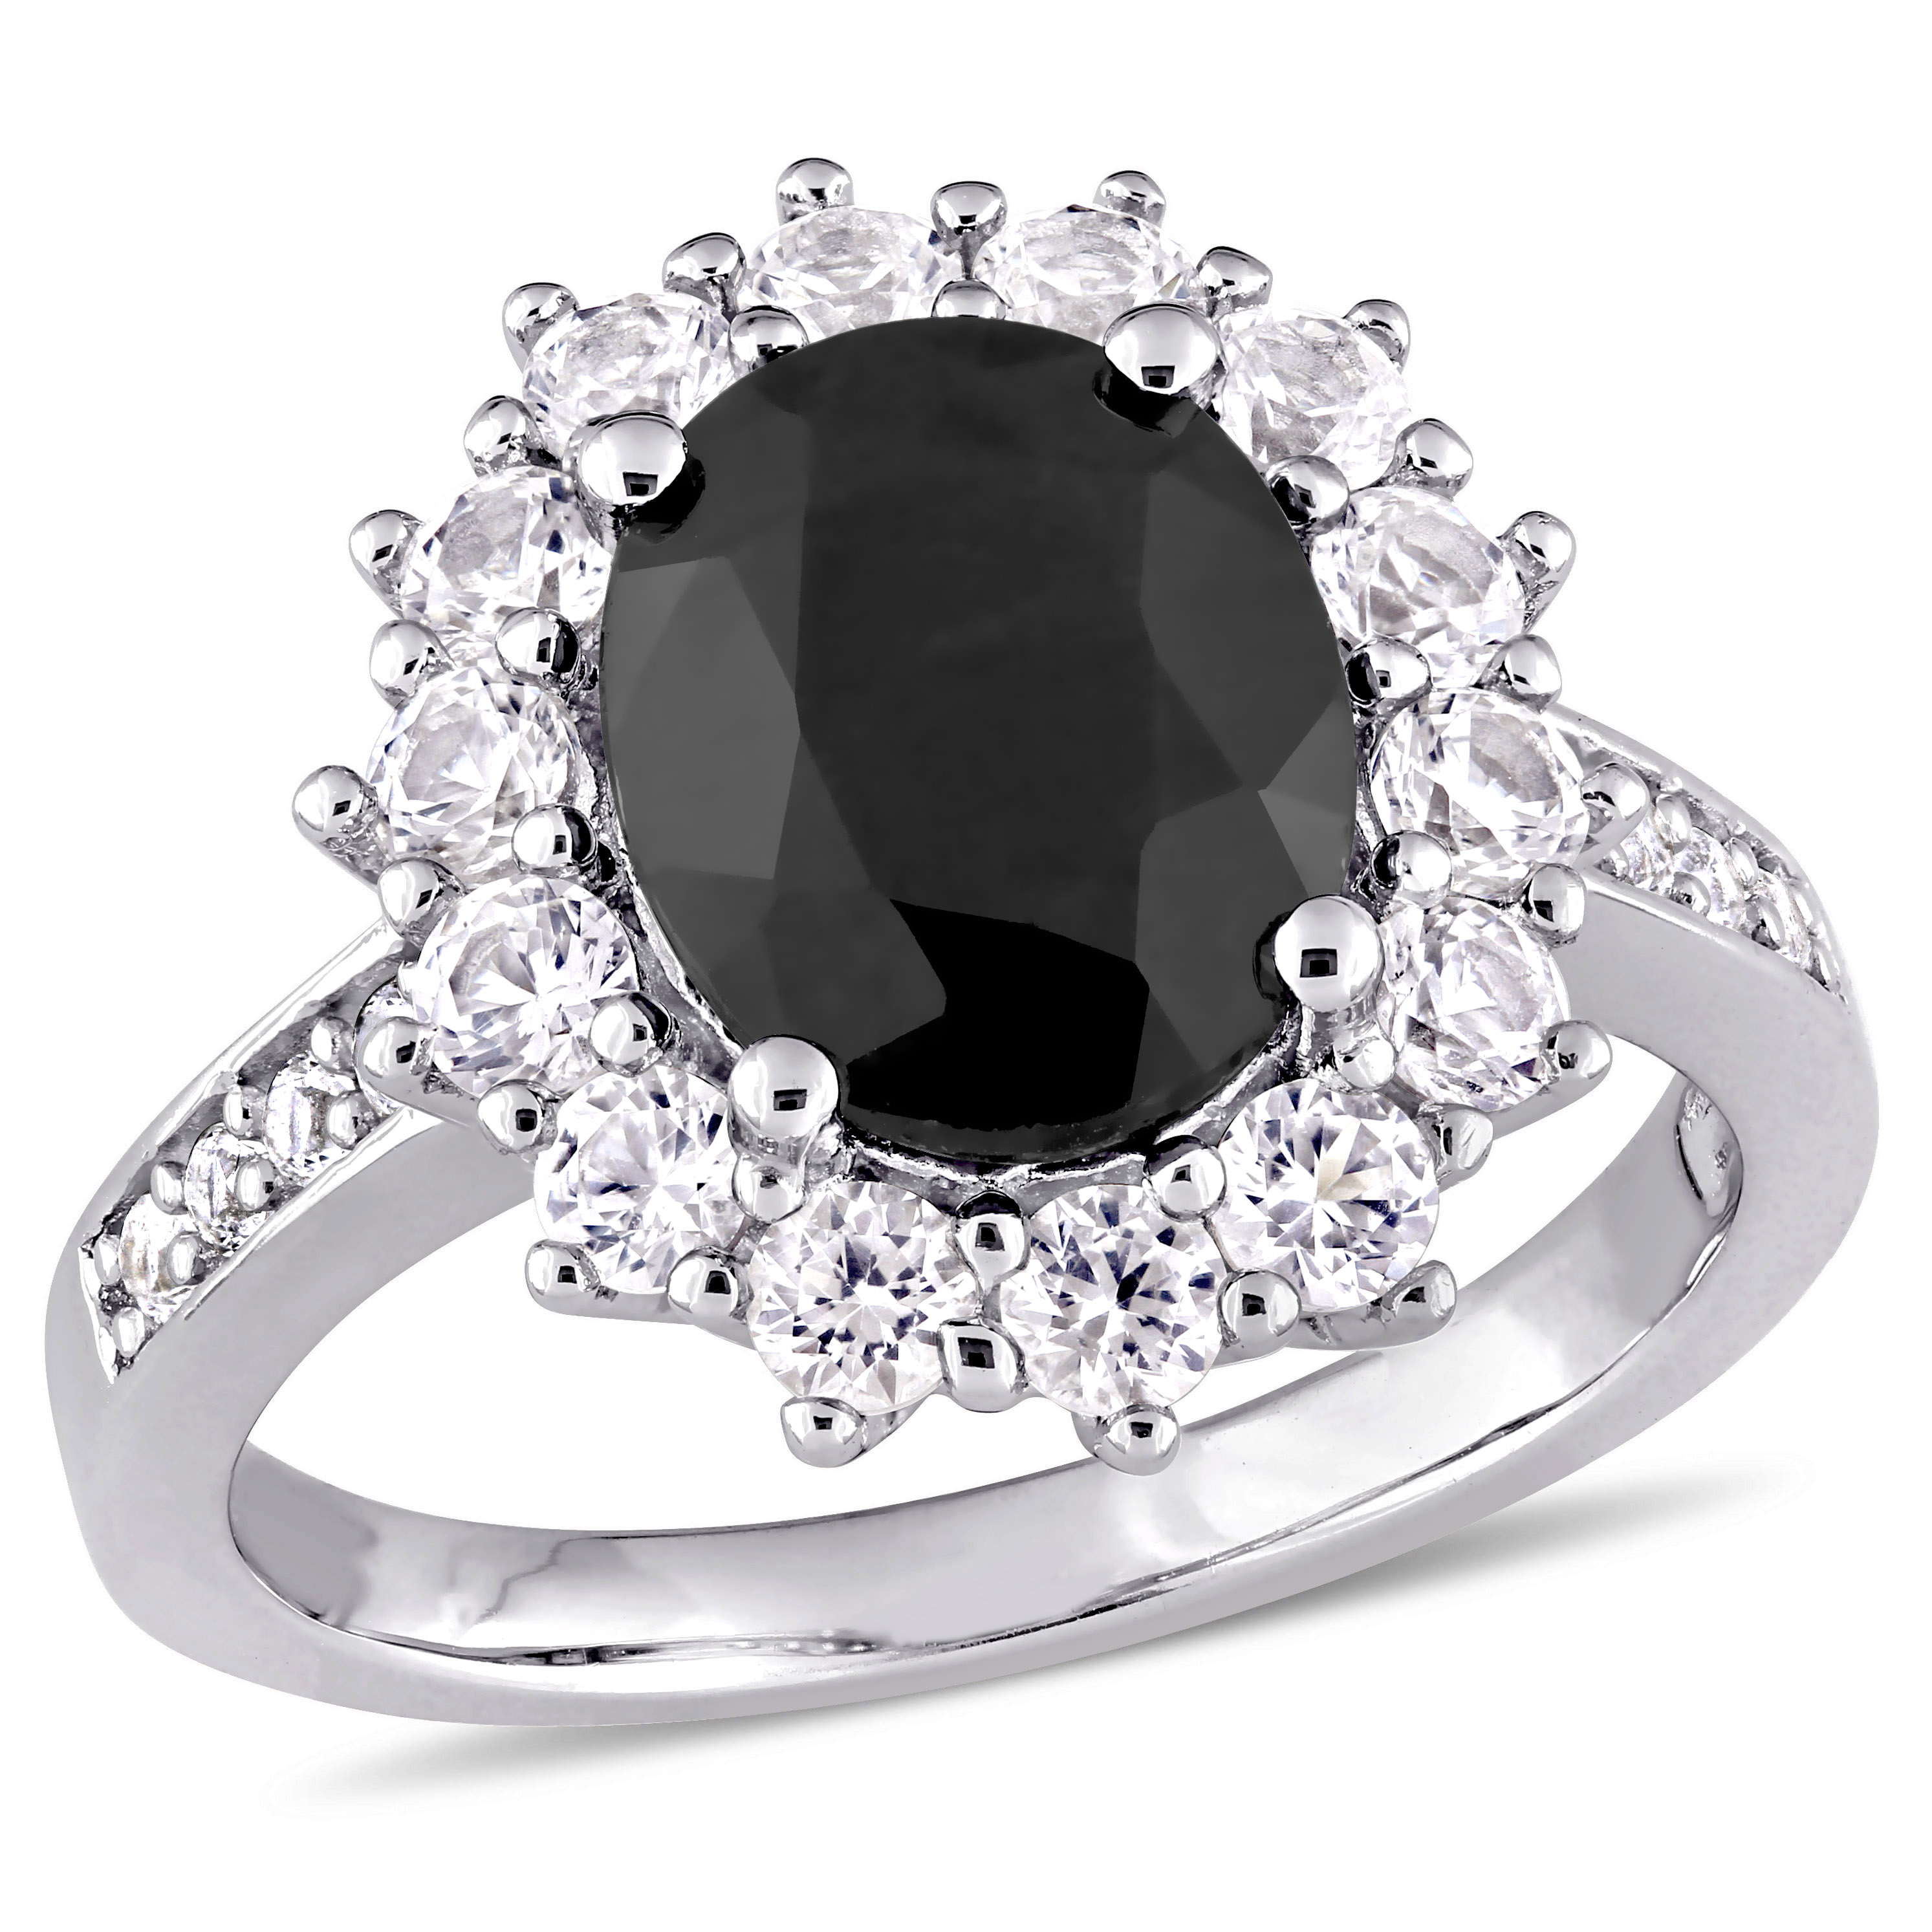 4 3/4 CT TGW Black Sapphire and Created White Sapphire Ring in Sterling Silver